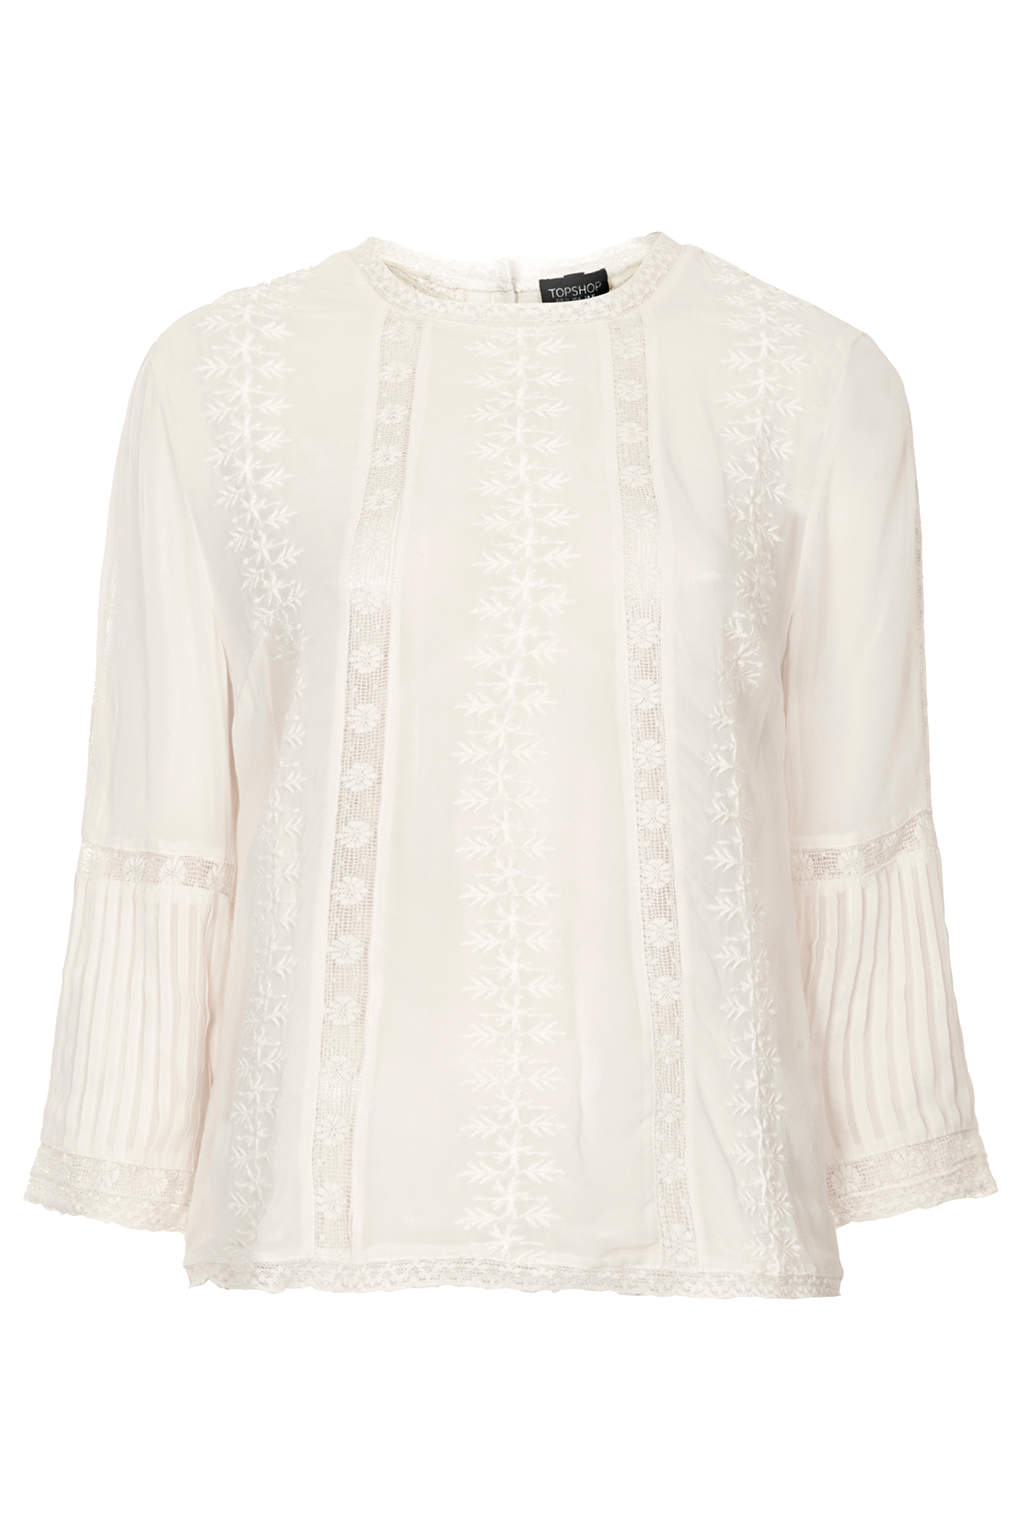 Lyst - Topshop Embroidered Blouse in White